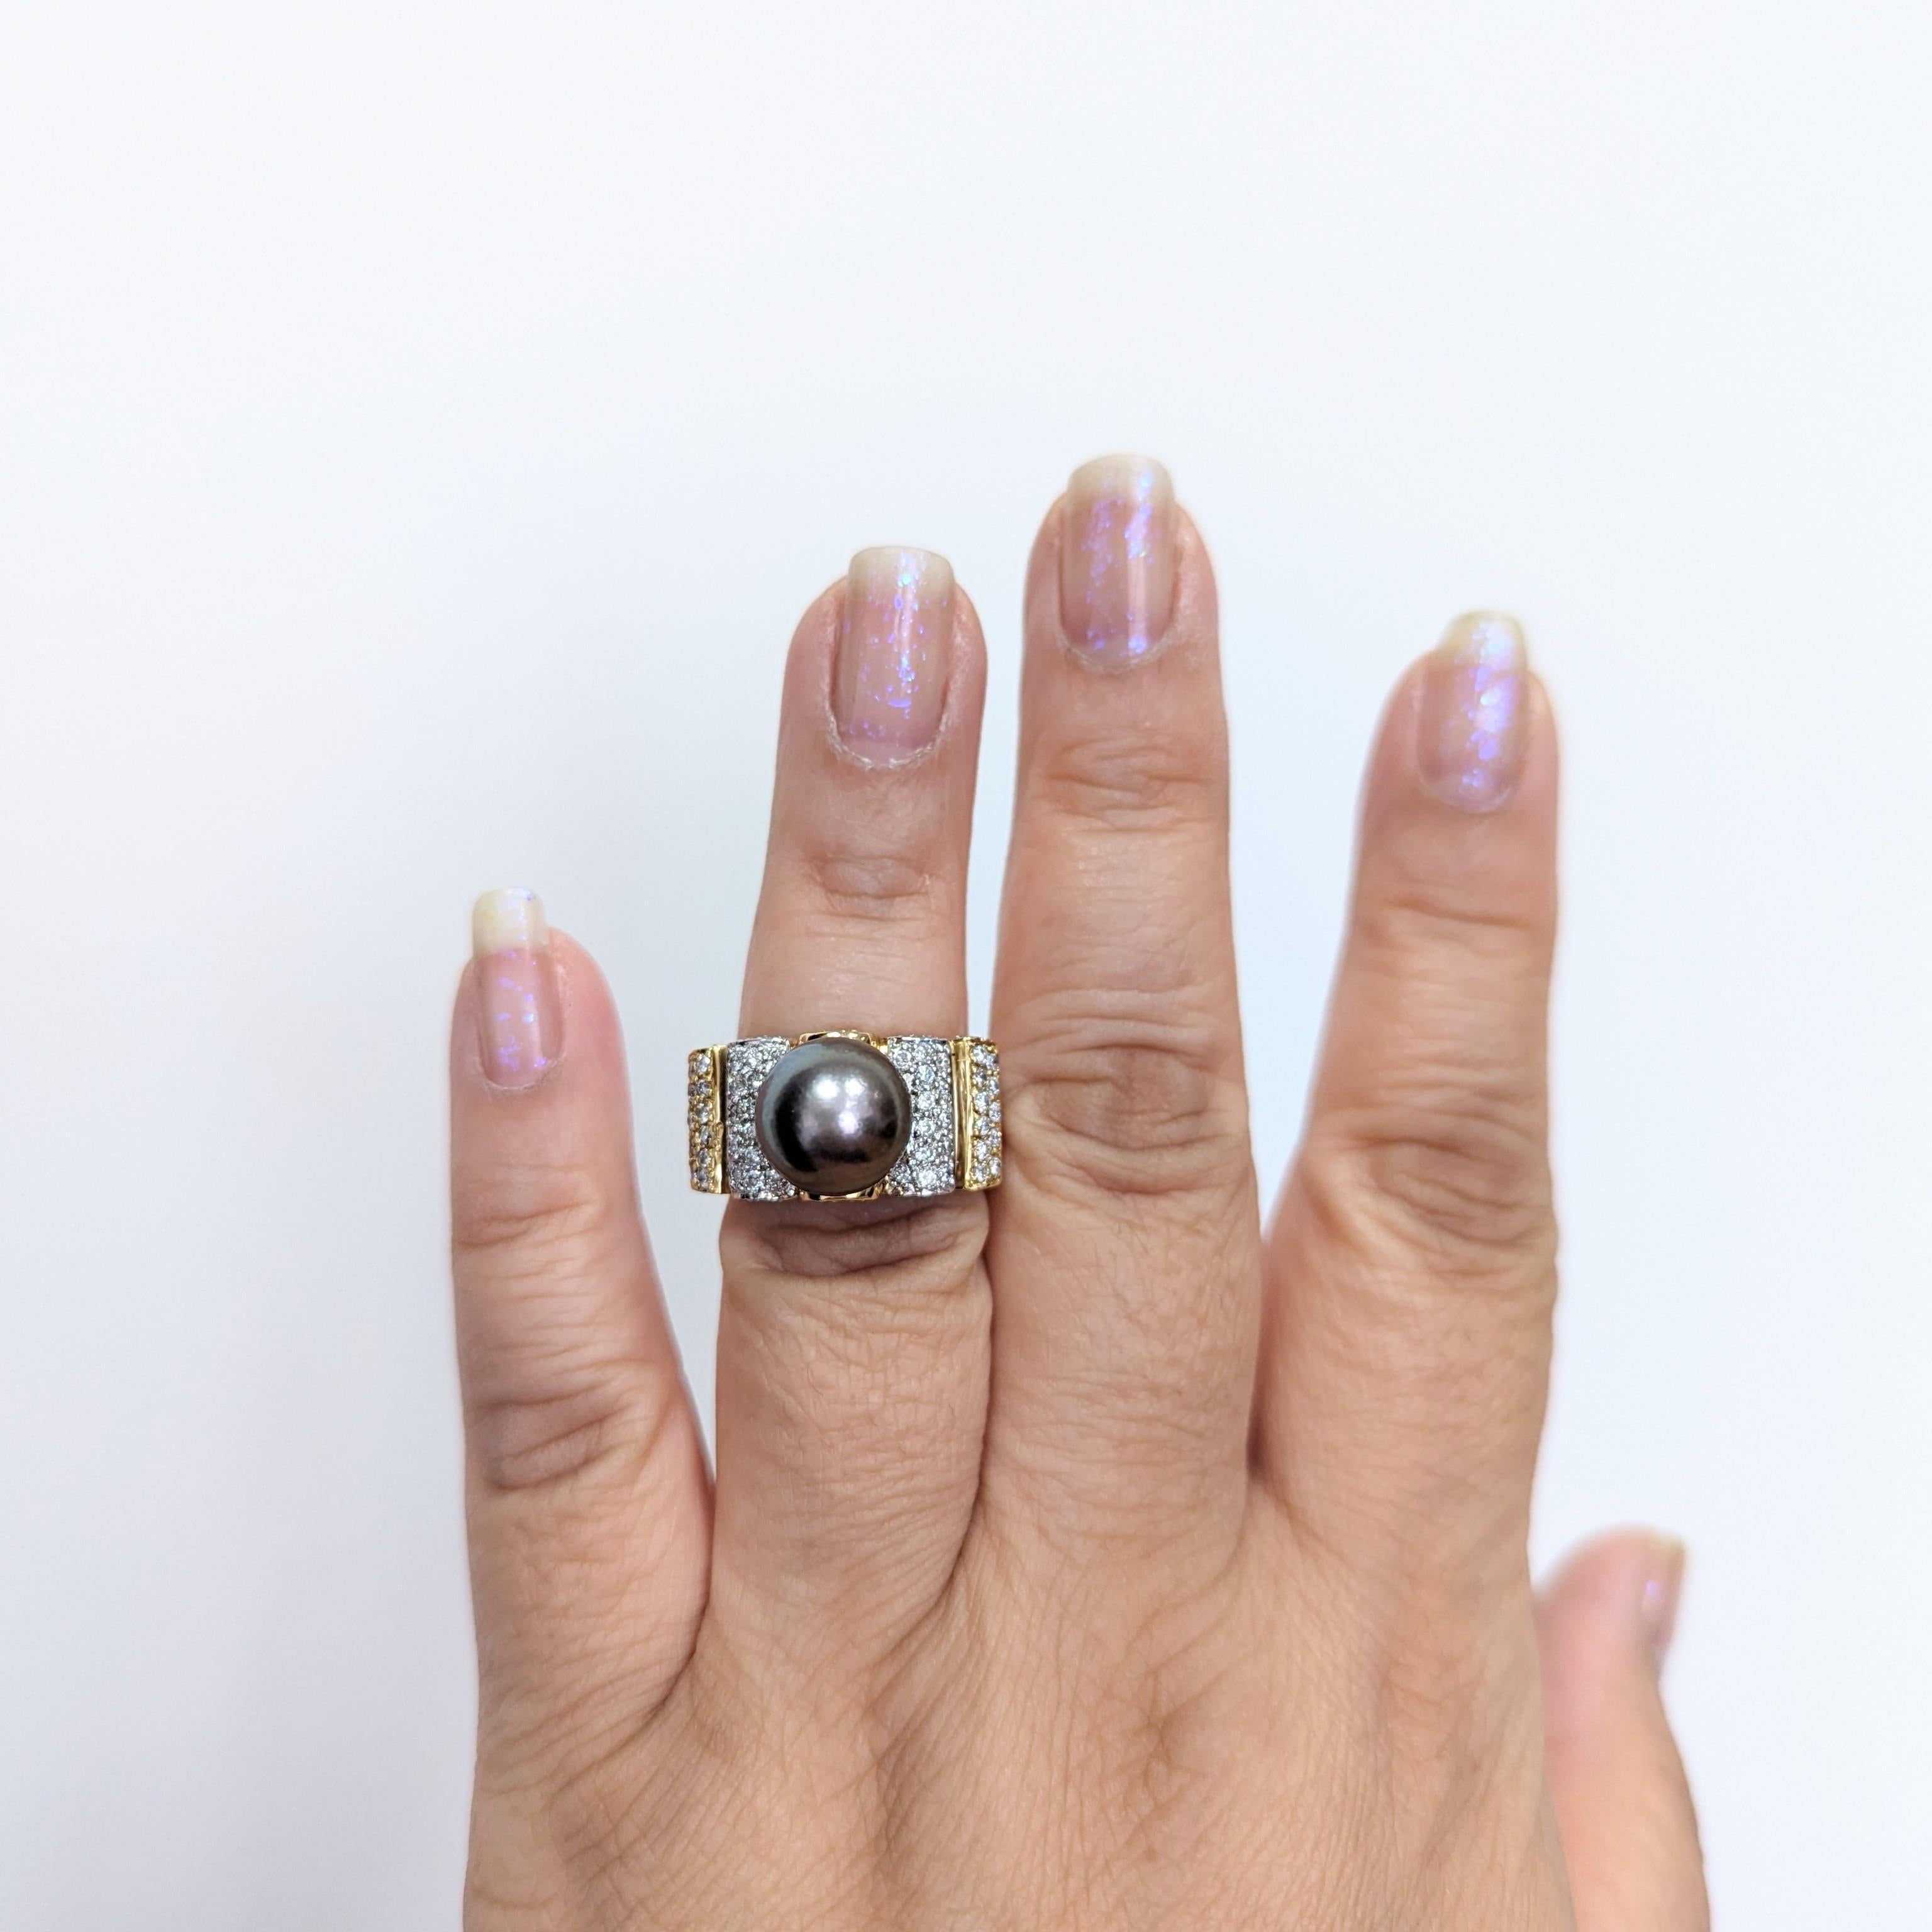 Beautiful black Tahitian pearl with 0.85 ct. white diamond round pave.  Handmade in 18k white and yellow gold.  Ring size 7.